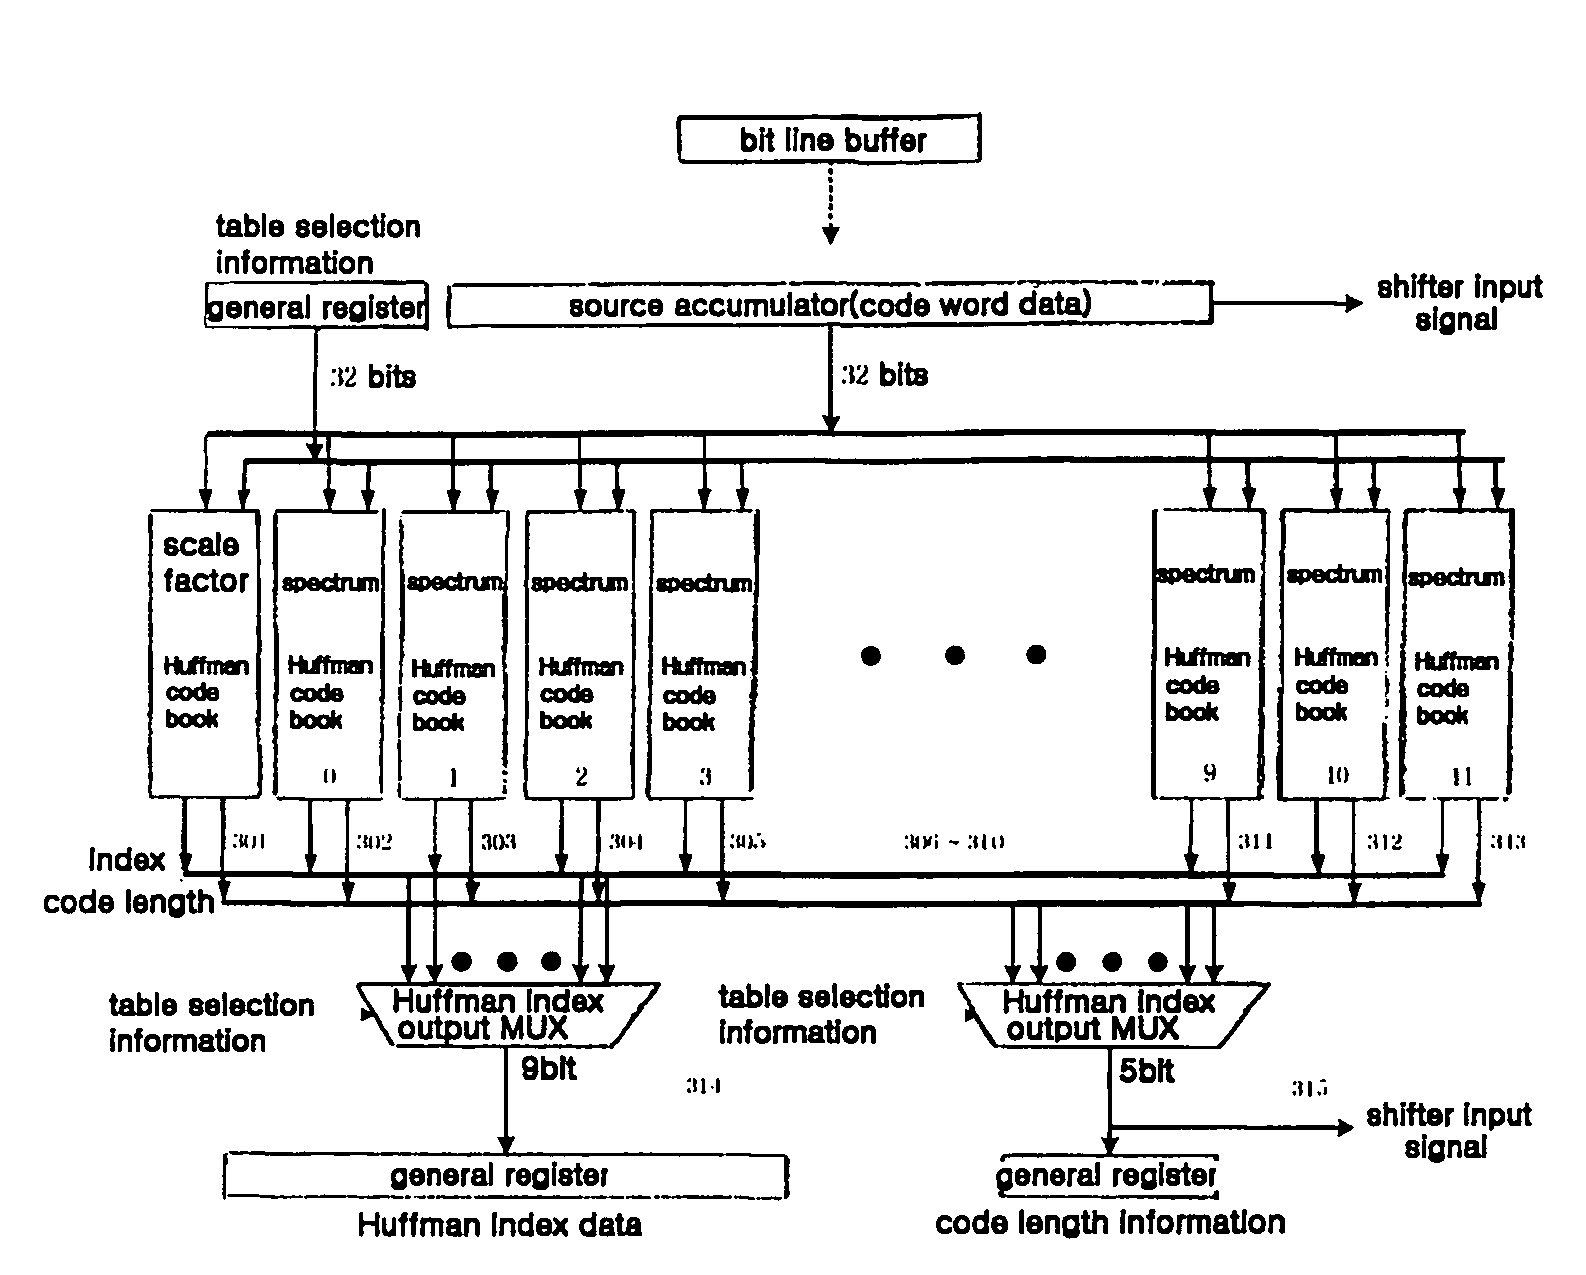 Computing circuits and method for running an MPEG-2 AAC or MPEG-4 AAC audio decoding algorithm on programmable processors